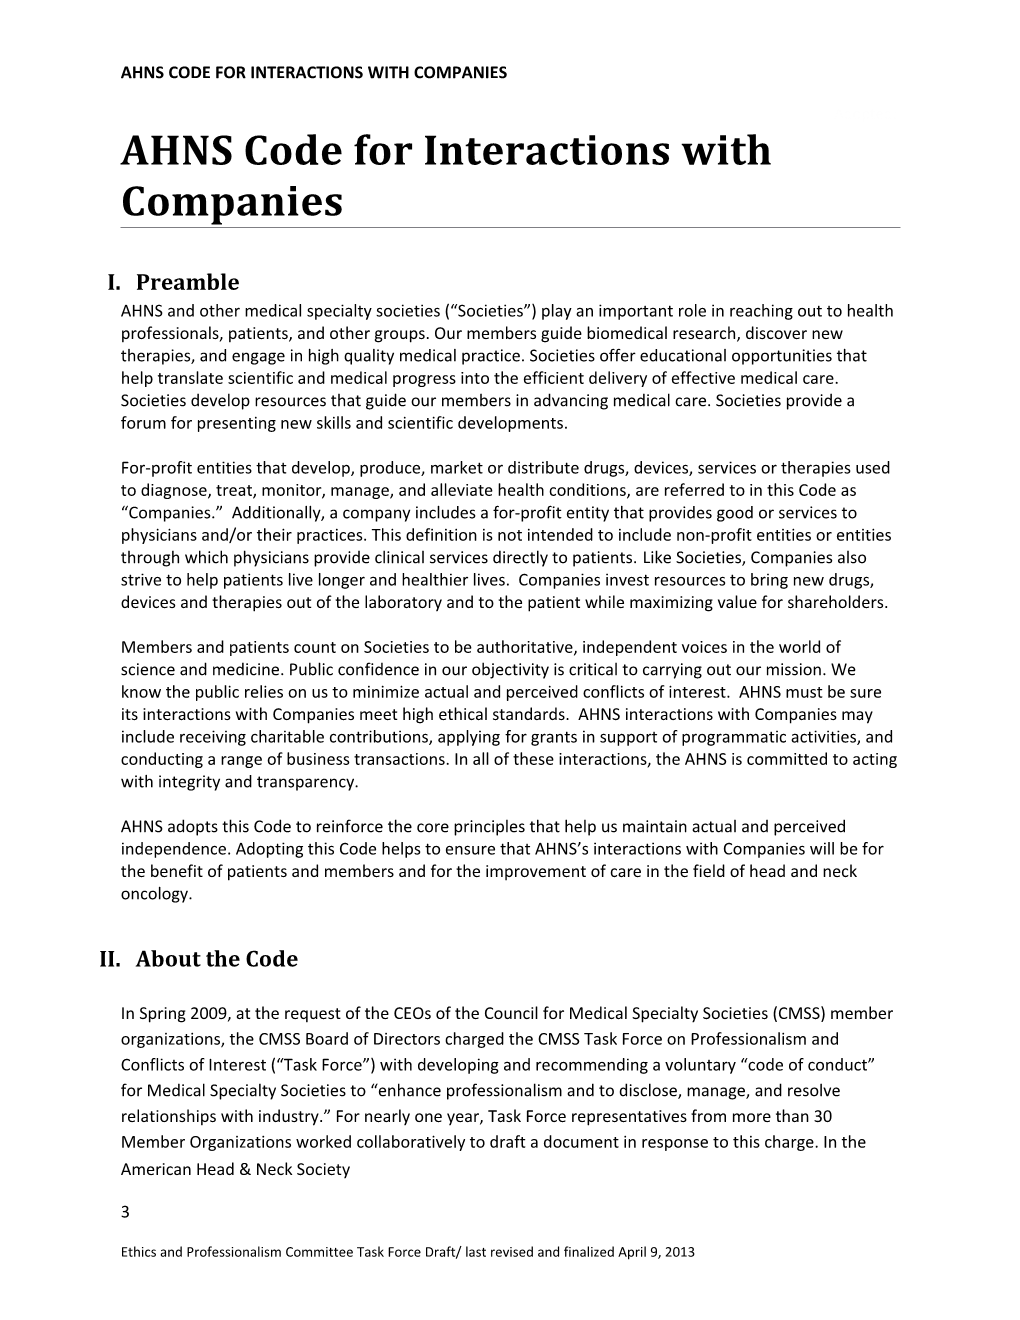 AHNS Code for Interactions with Companies